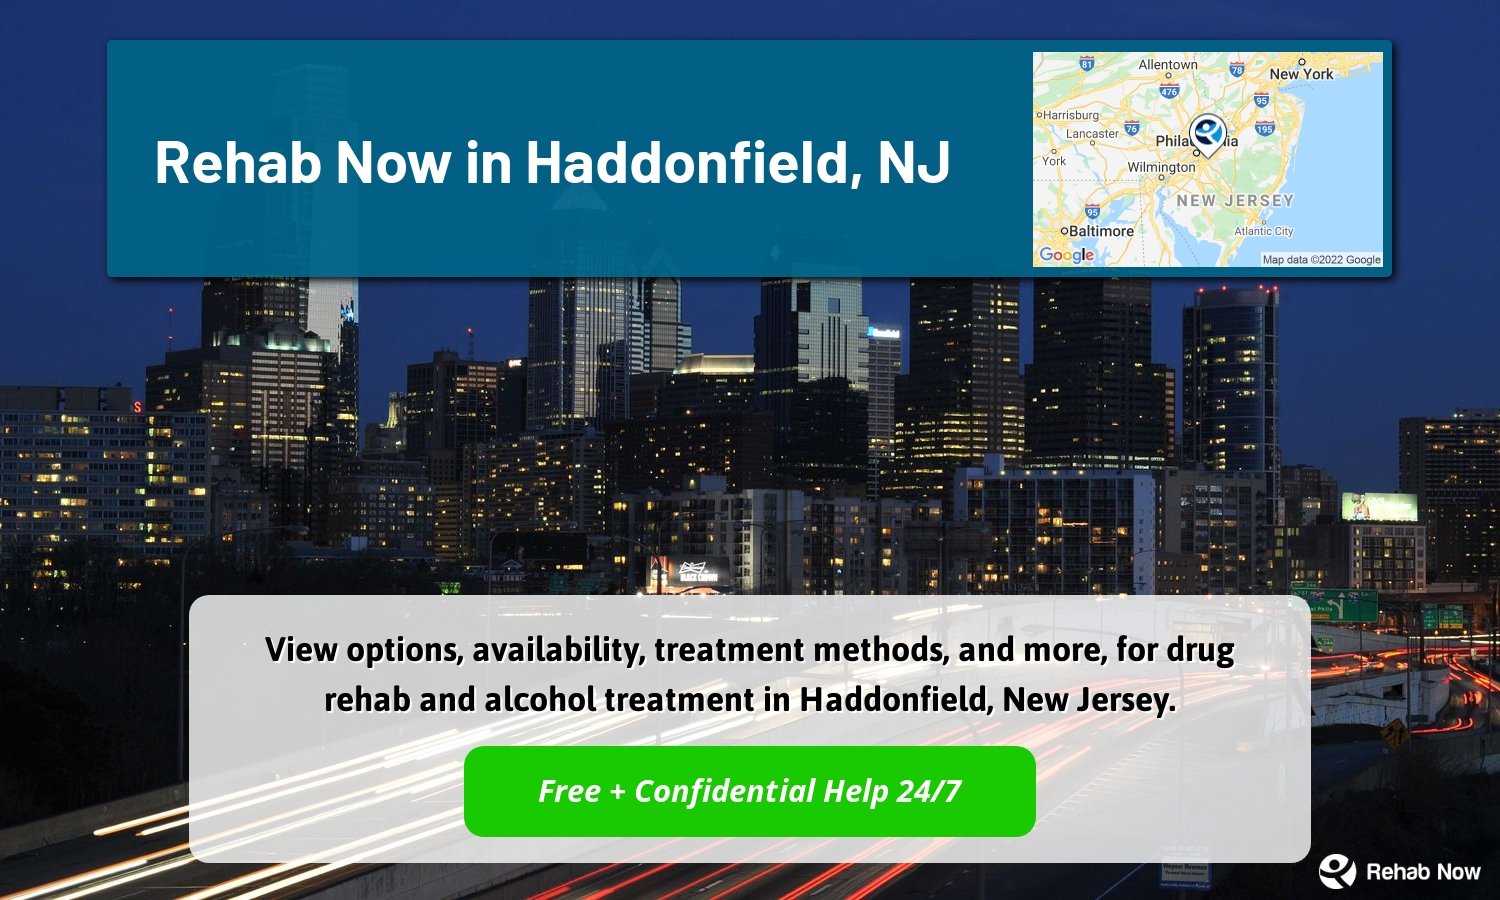 View options, availability, treatment methods, and more, for drug rehab and alcohol treatment in Haddonfield, New Jersey.